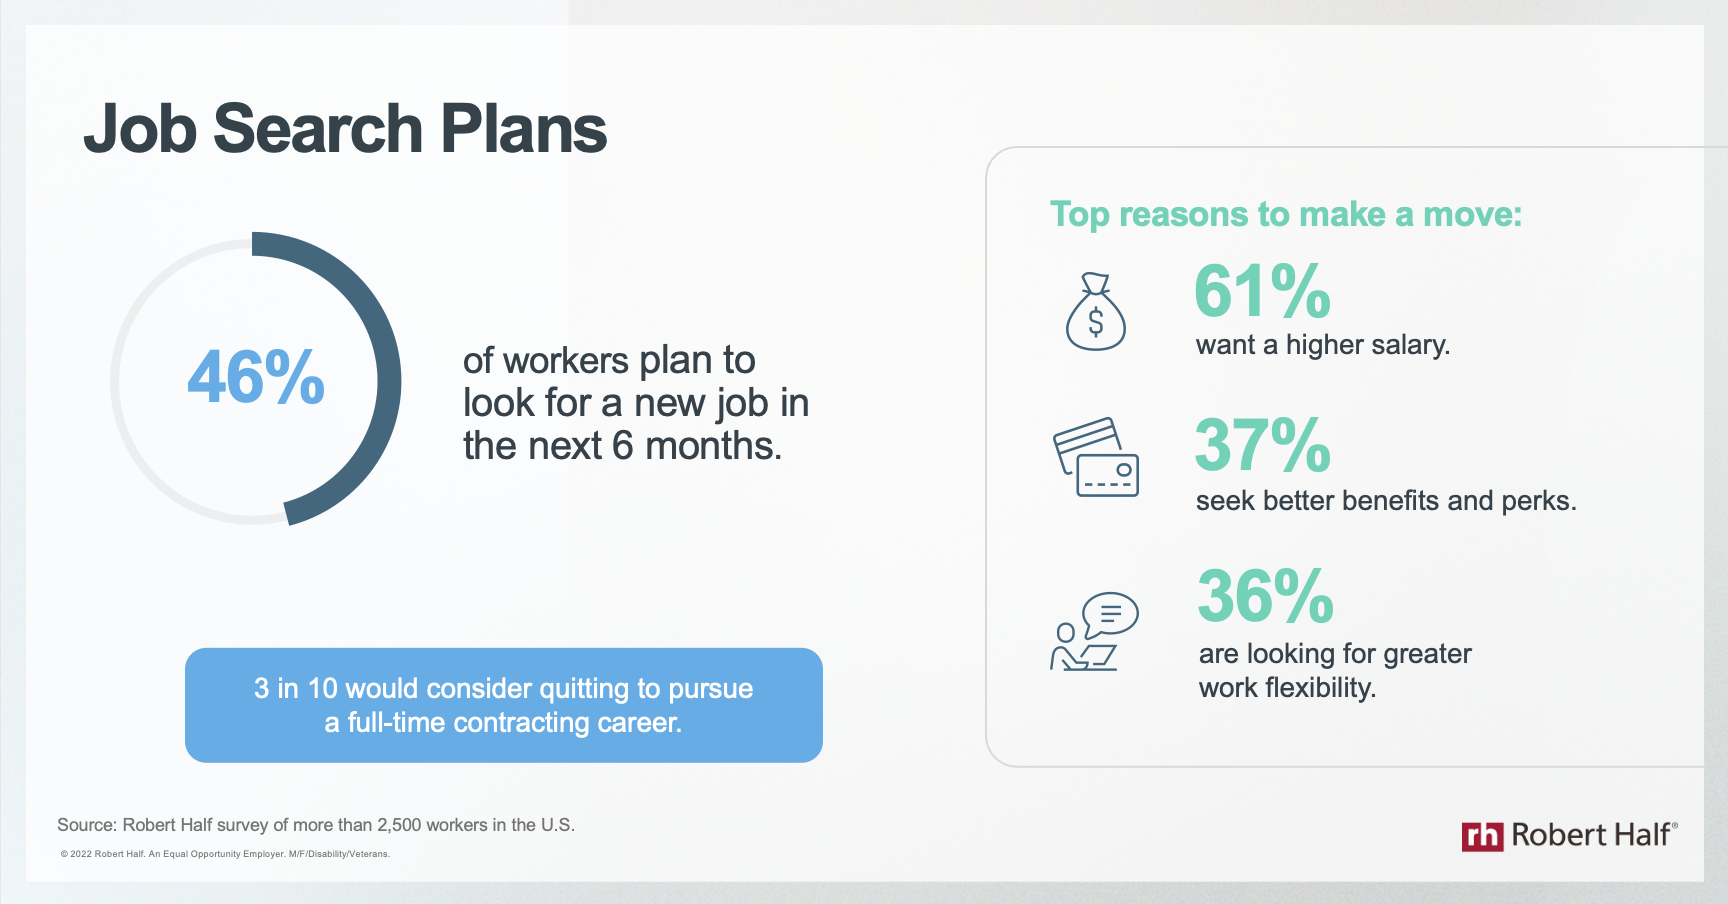 Job Search Plans Infographic